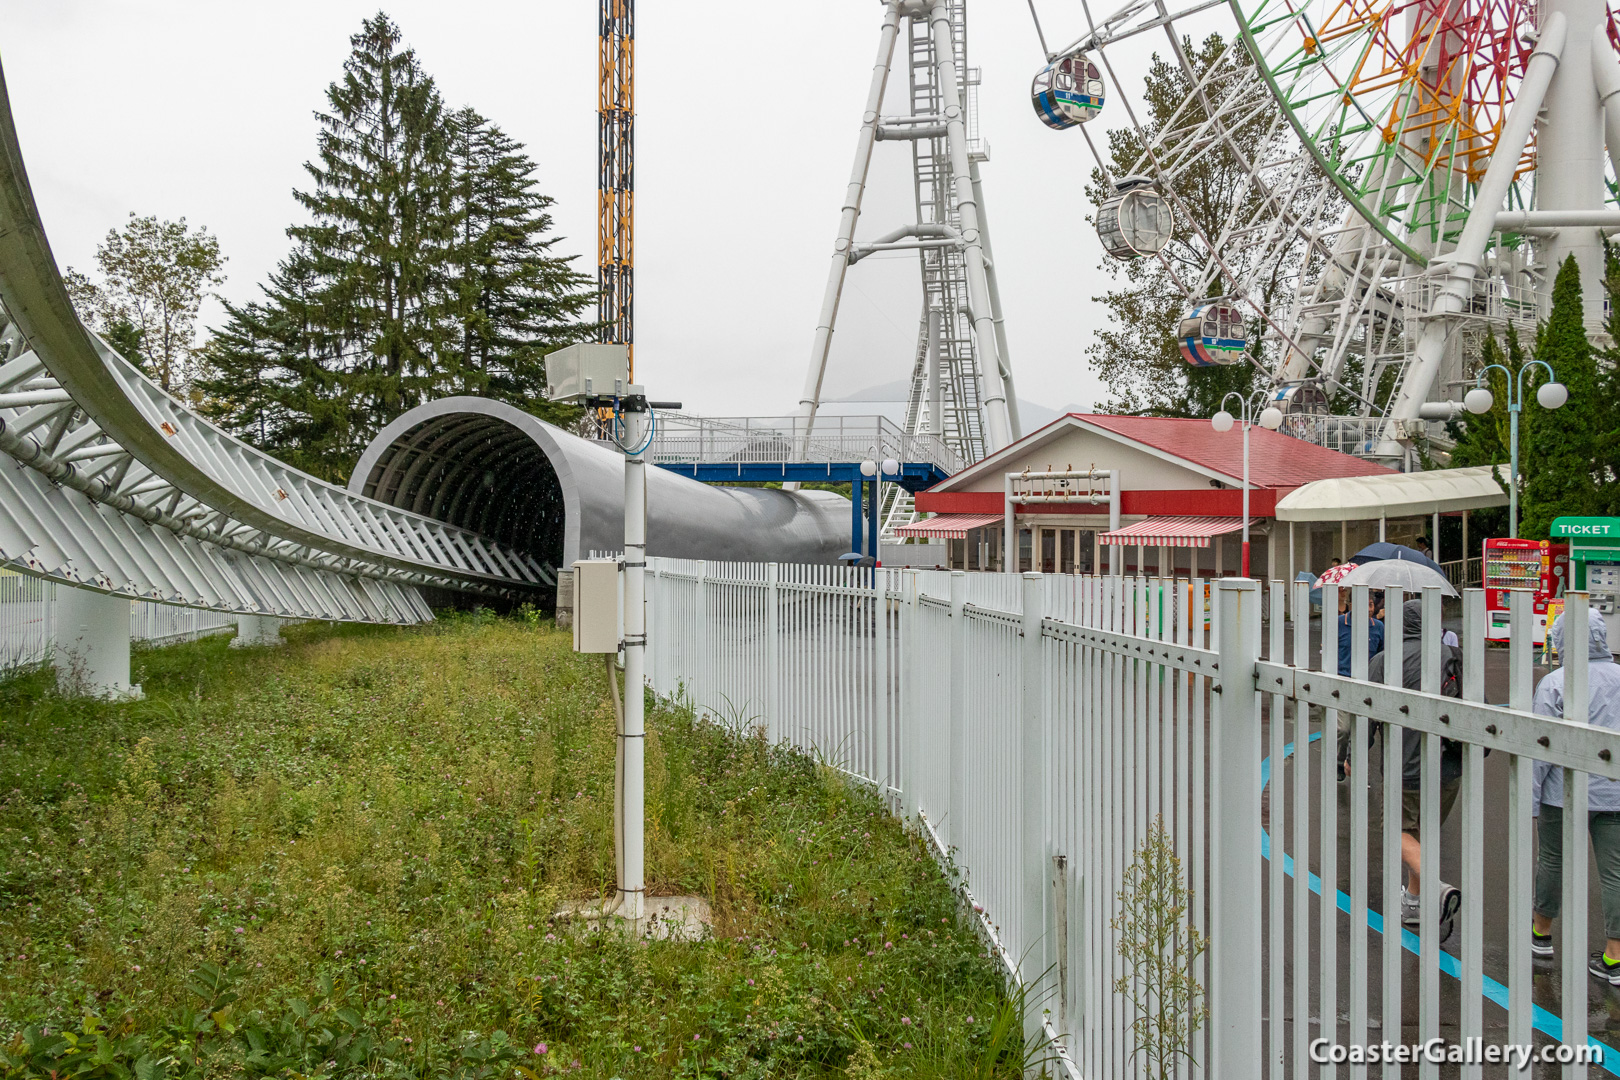 Pictures of the Do-Dodonpa roller coaster tunnel